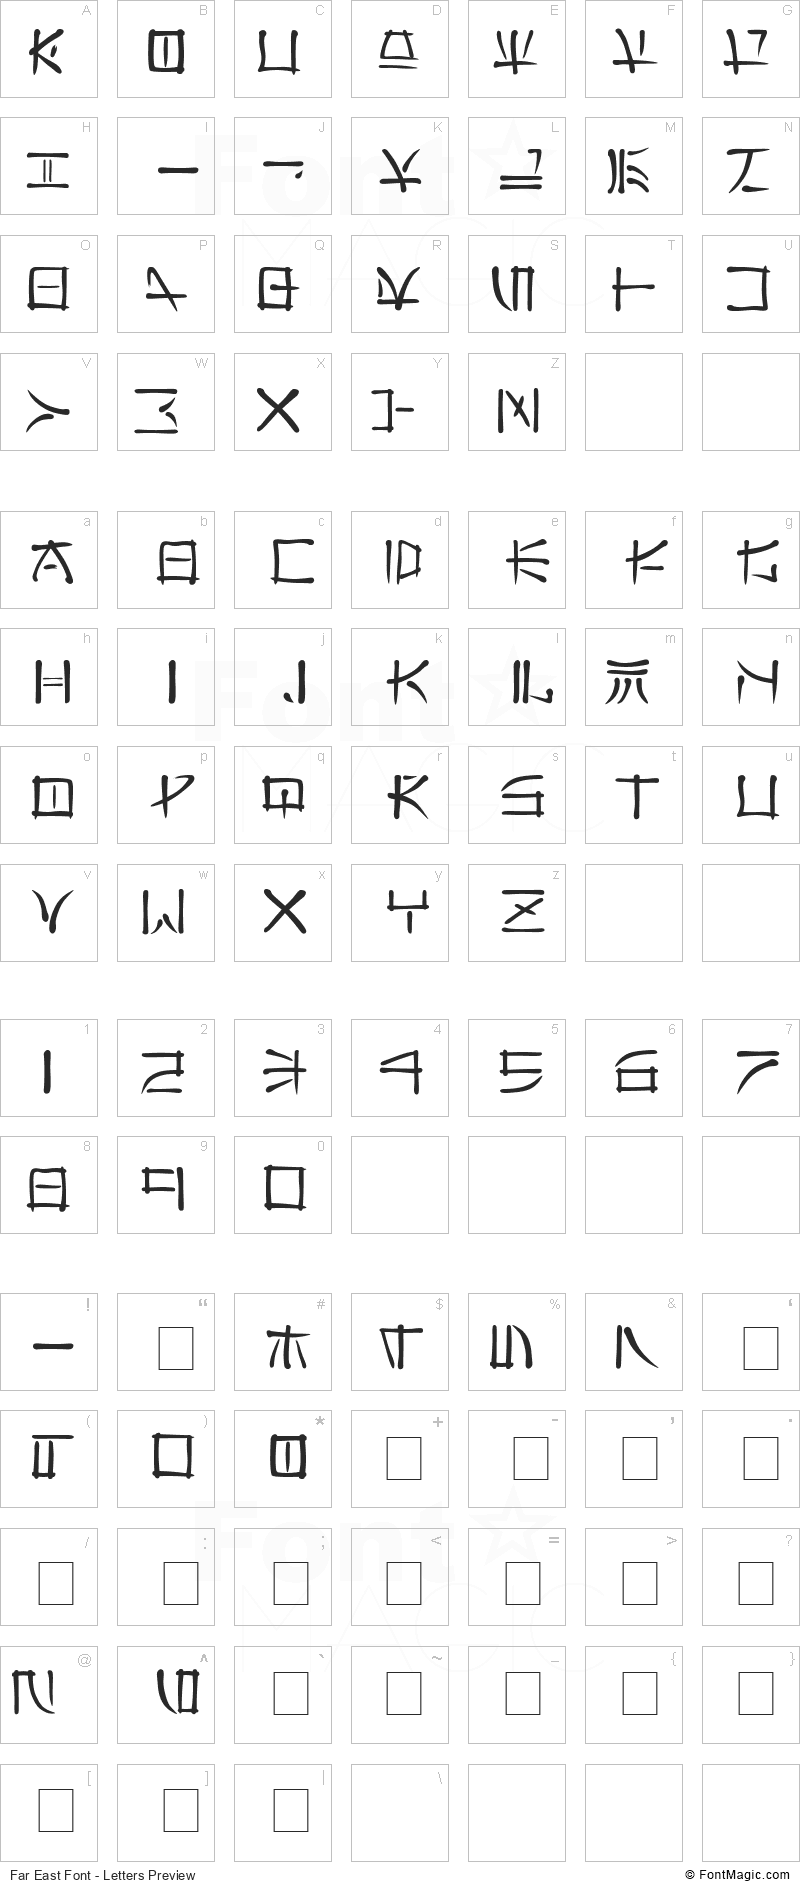 Far East Font - All Latters Preview Chart